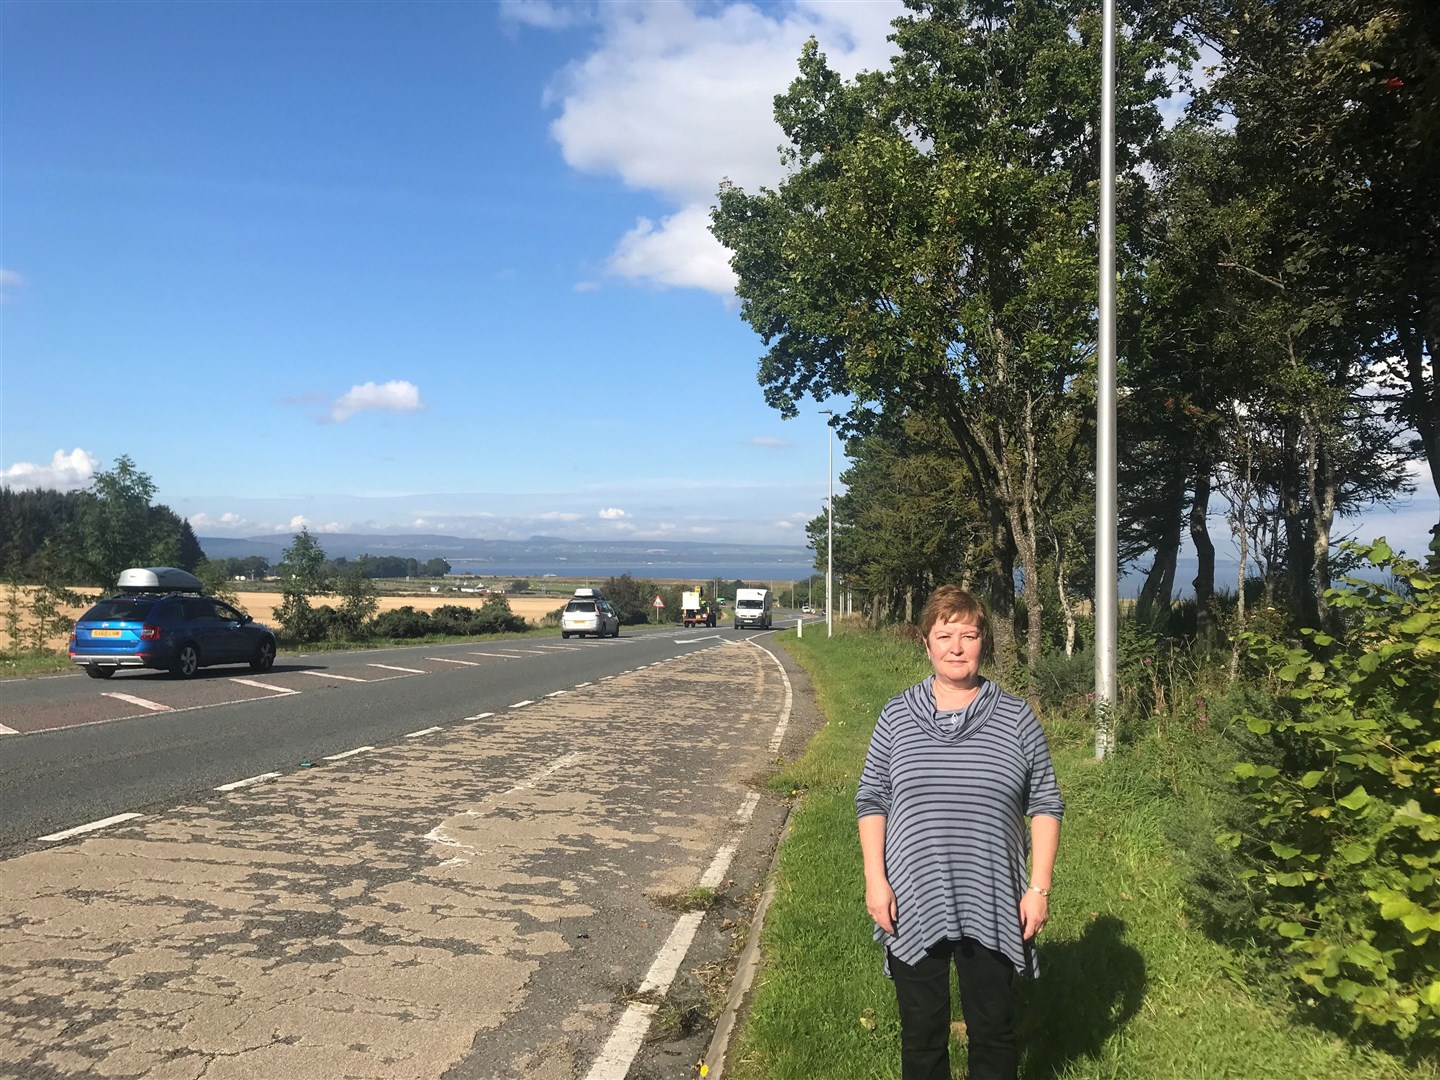 Rhoda Grant at one of the junctions on the Tain bypass.